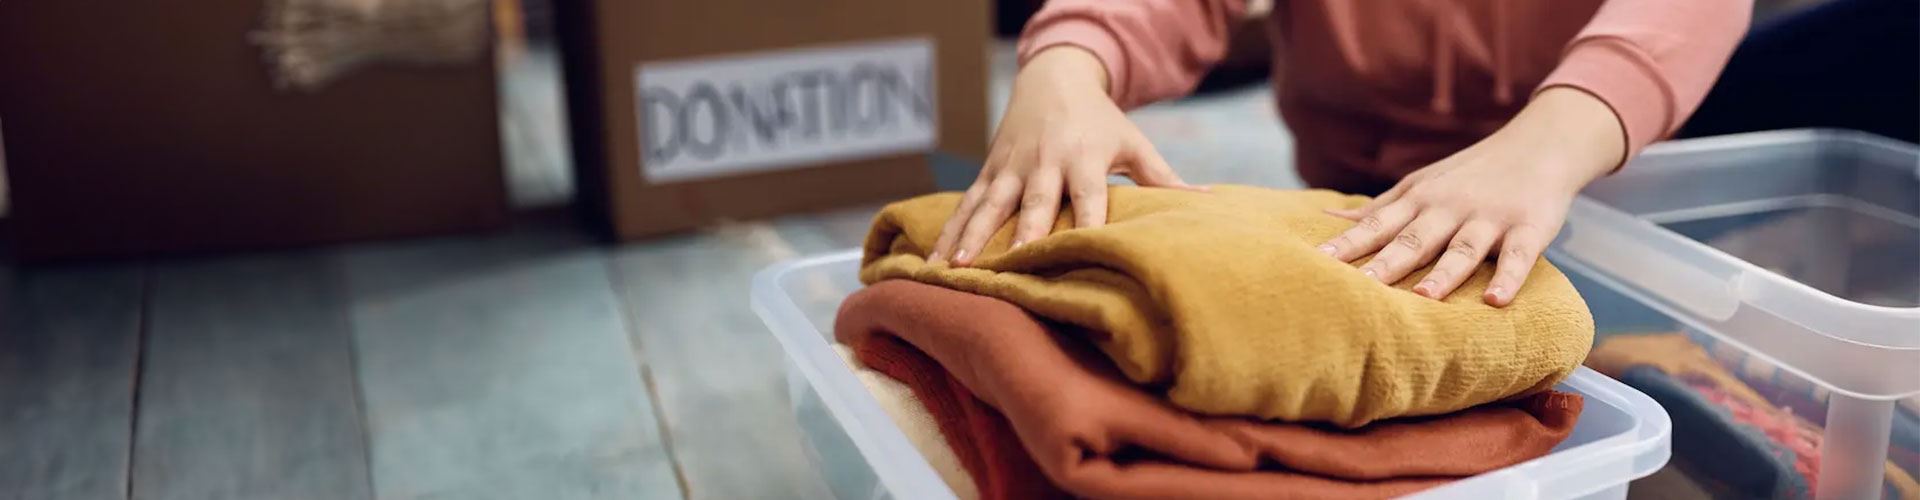 person putting clothing into box for donation